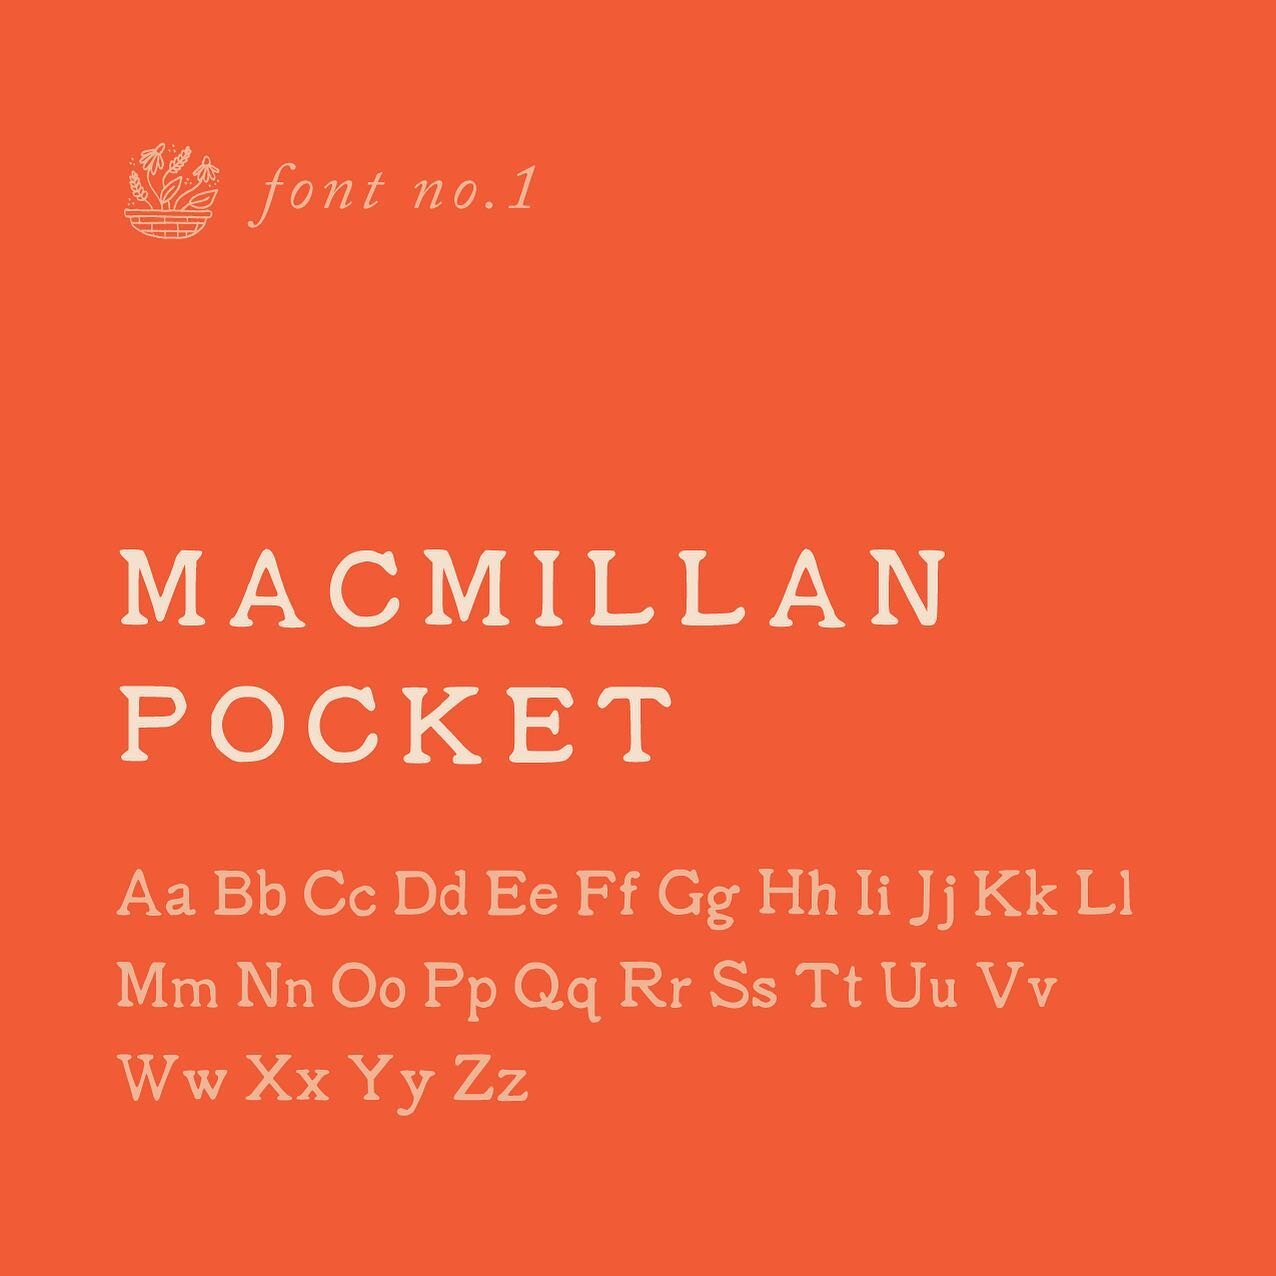 It&rsquo;s October and I&rsquo;m emerging from digital hibernation to share FFCo&rsquo;s first FONT! This beauty will be named Macmillan Pocket, inspired by a small page of text in an old book I stumbled on this summer. Keep an eye out on my site for